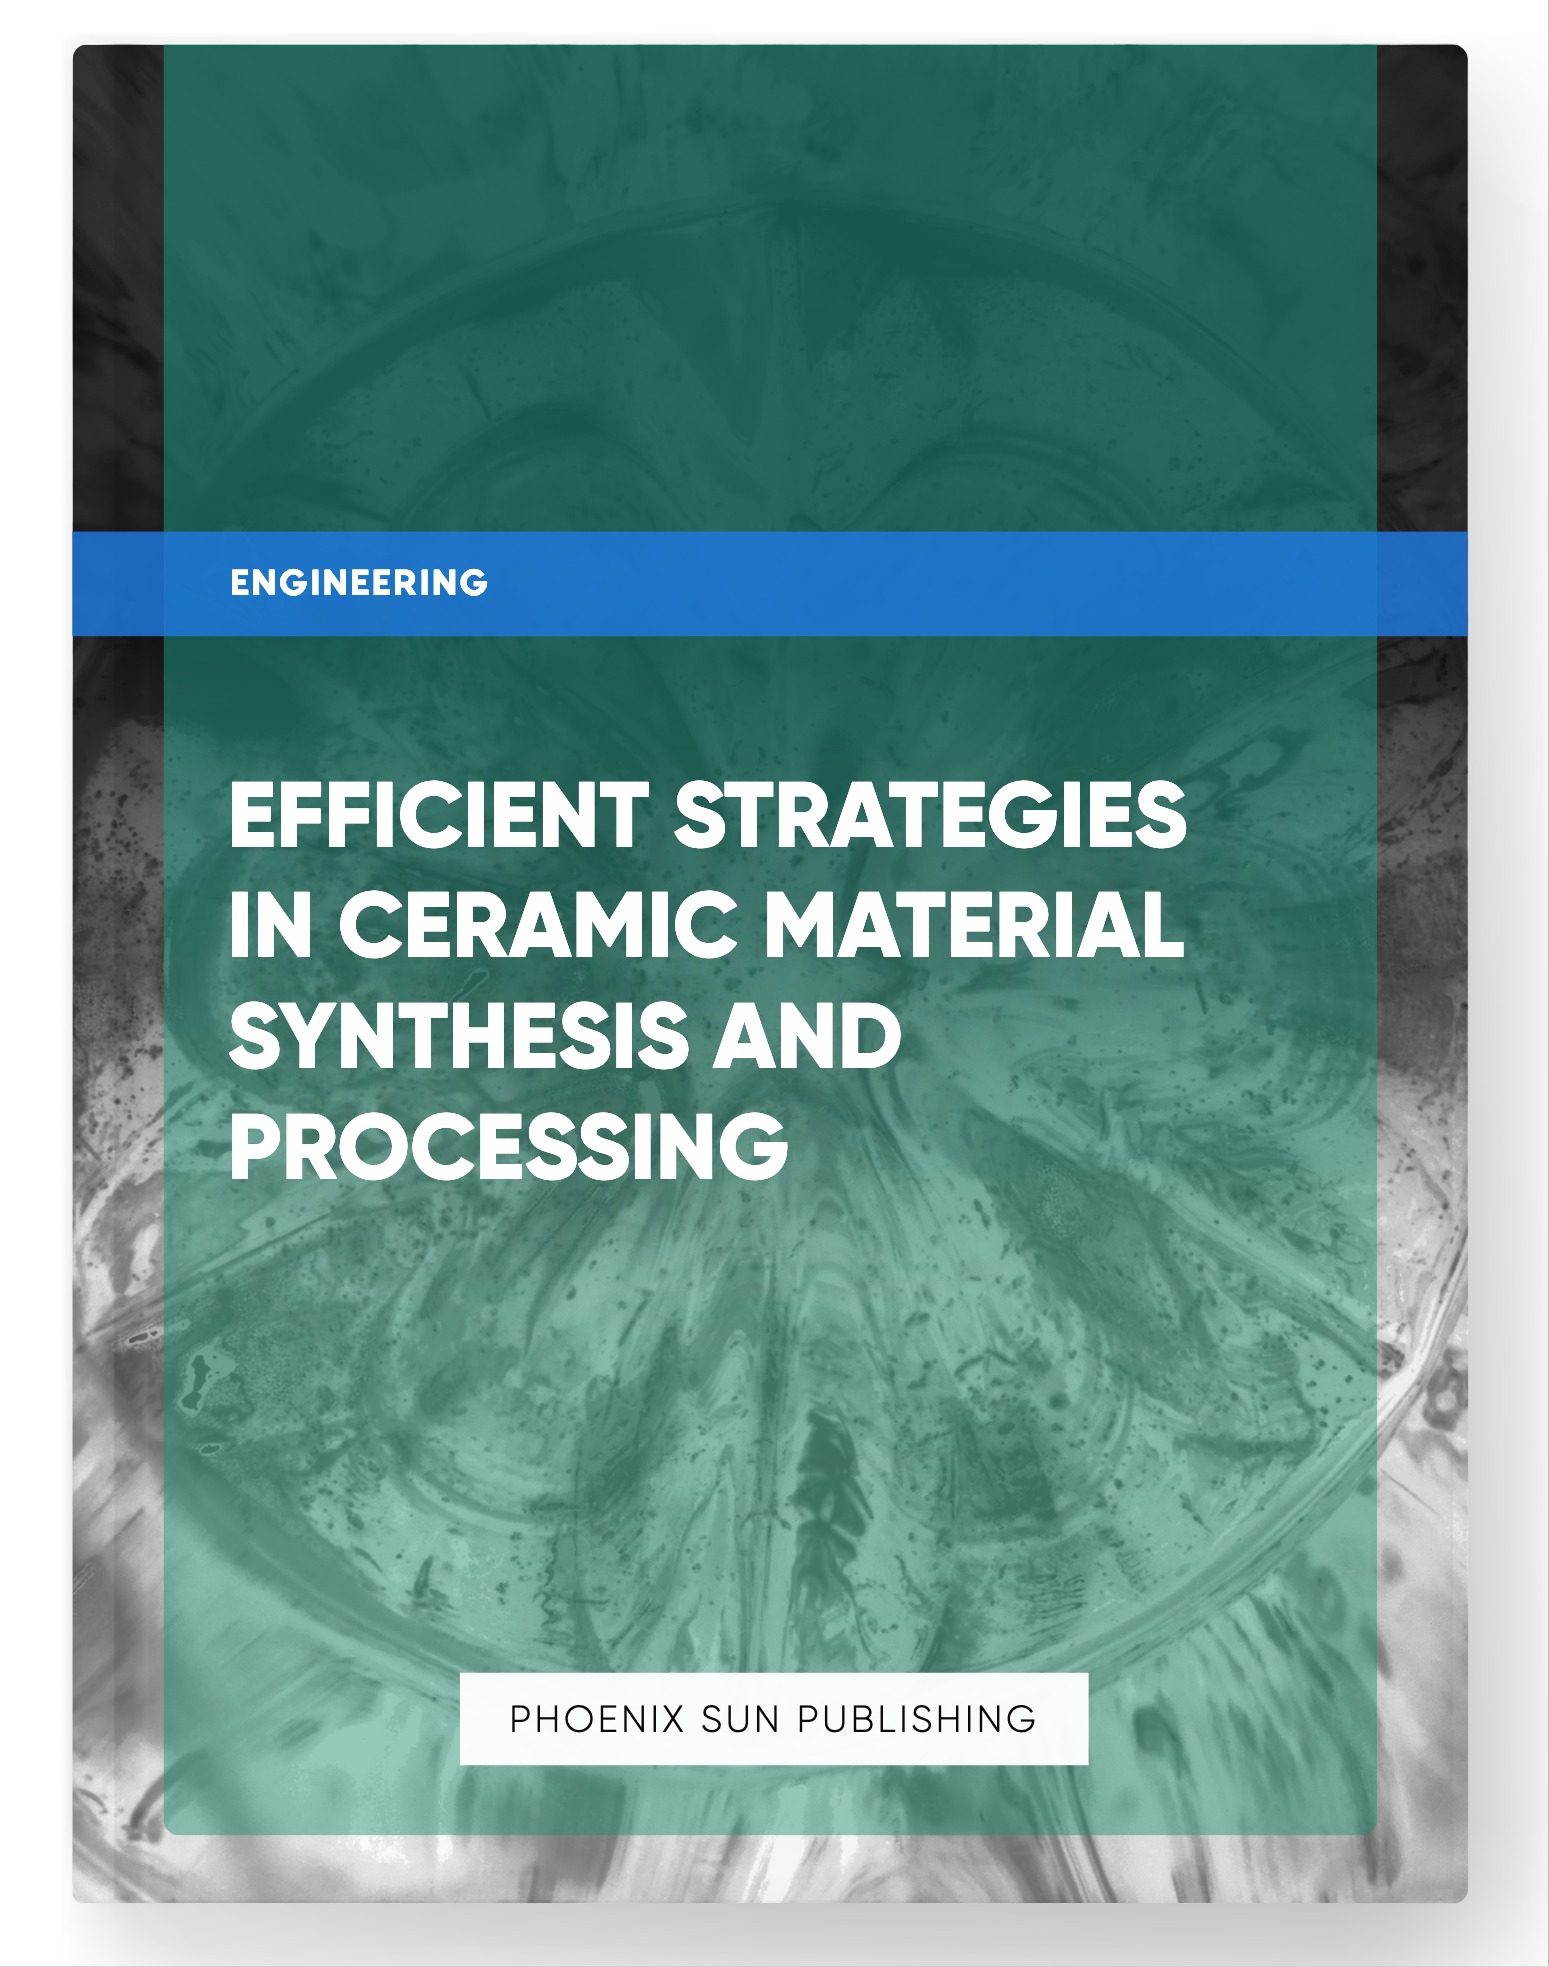 Efficient Strategies in Ceramic Material Synthesis and Processing